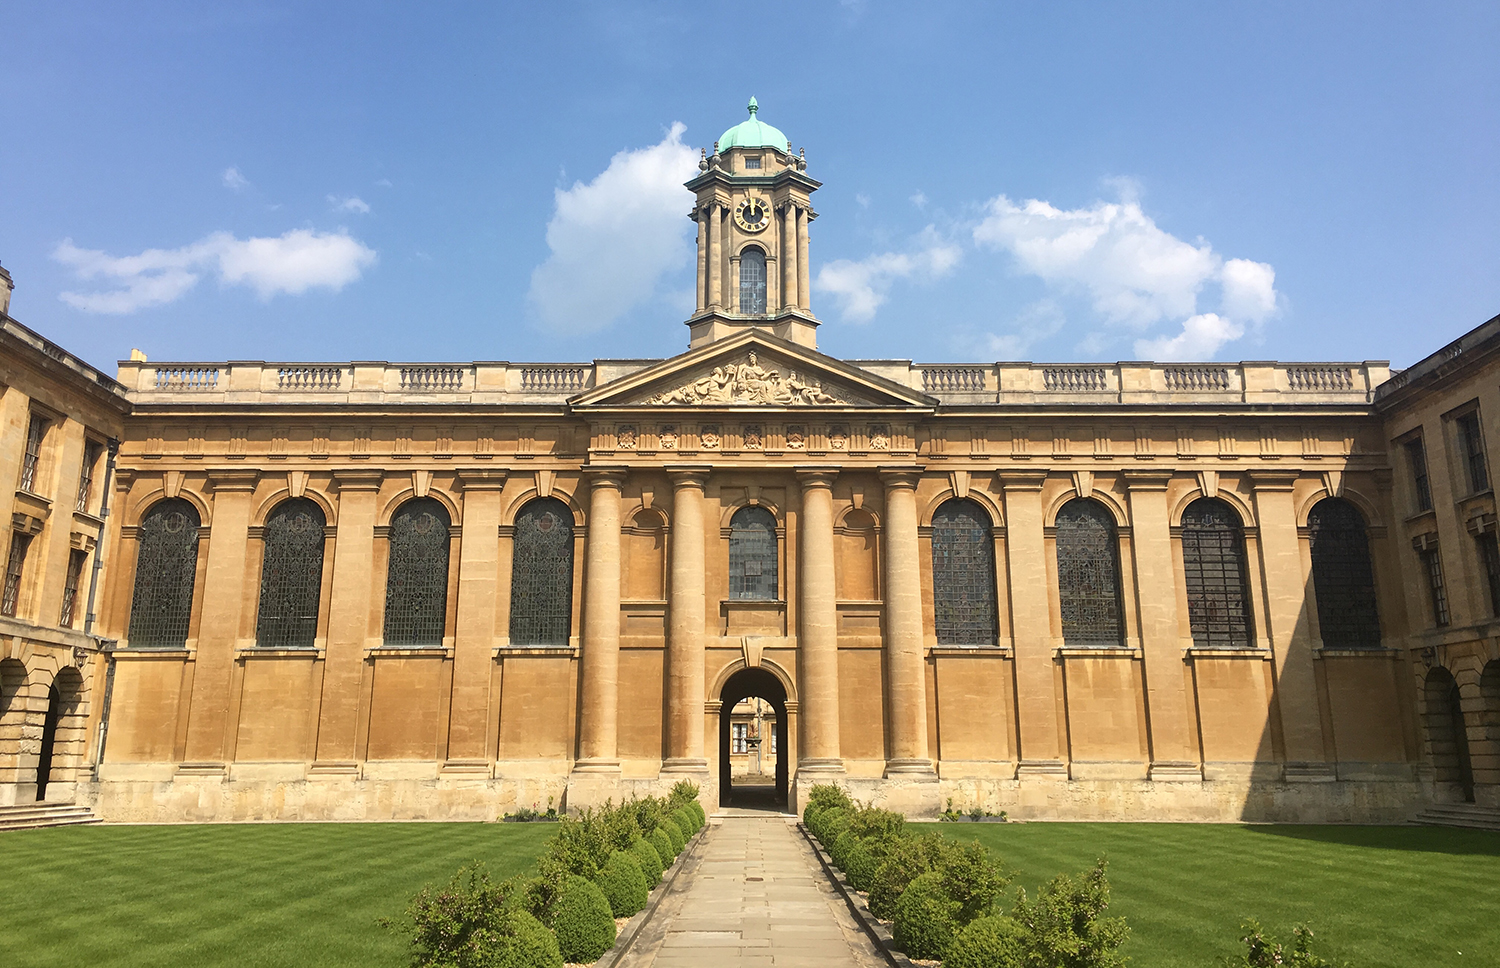 The Queen’s College, University of Oxford, where Burn studied in the 18th century